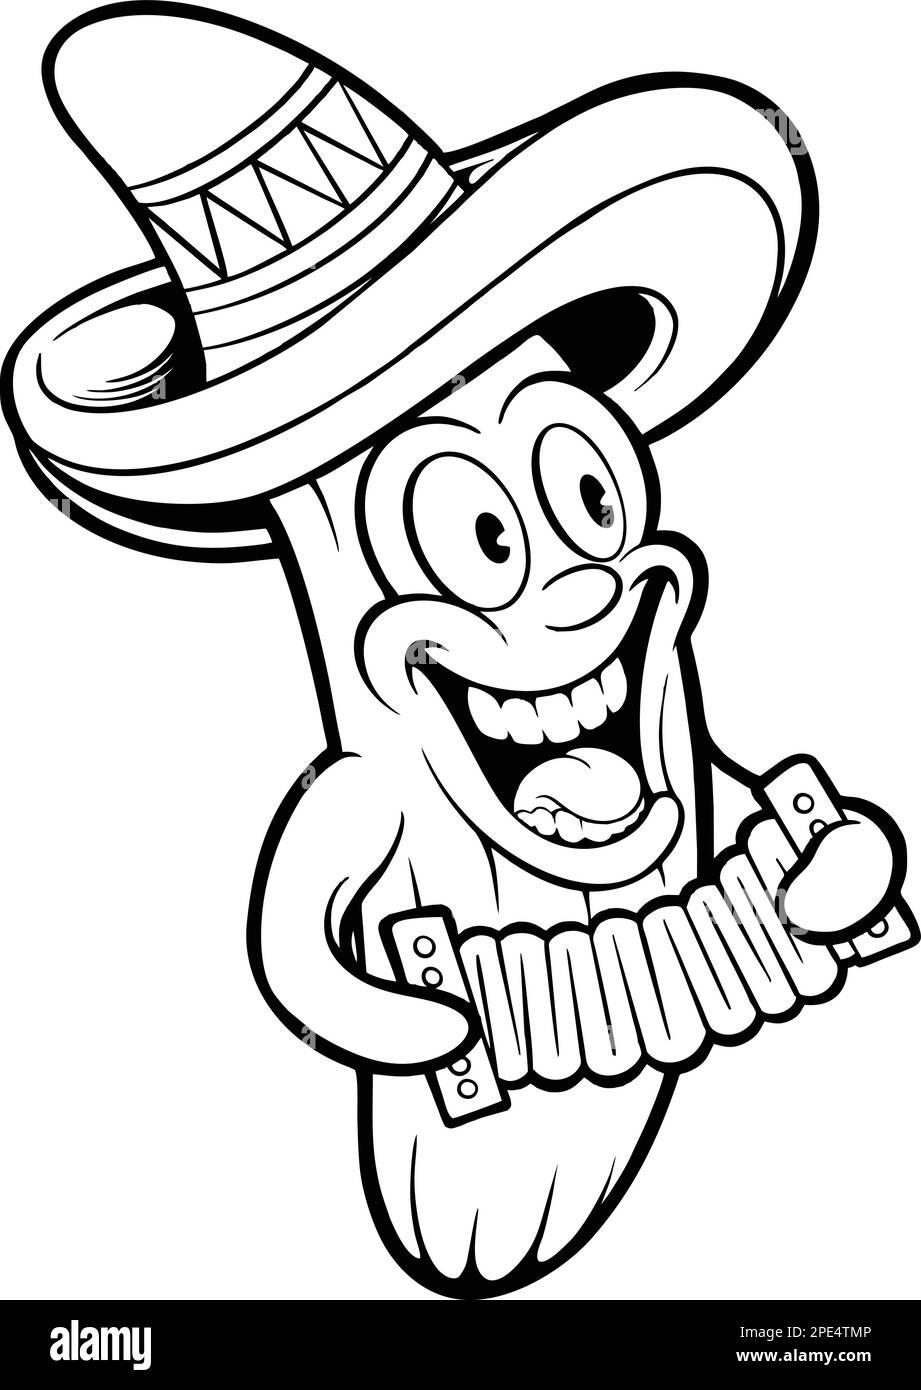 Cute mexican cactus sombrero hat playing accordion cinco de mayo monochrome vector illustrations for your work logo, merchandise t-shirt, stickers and Stock Vector